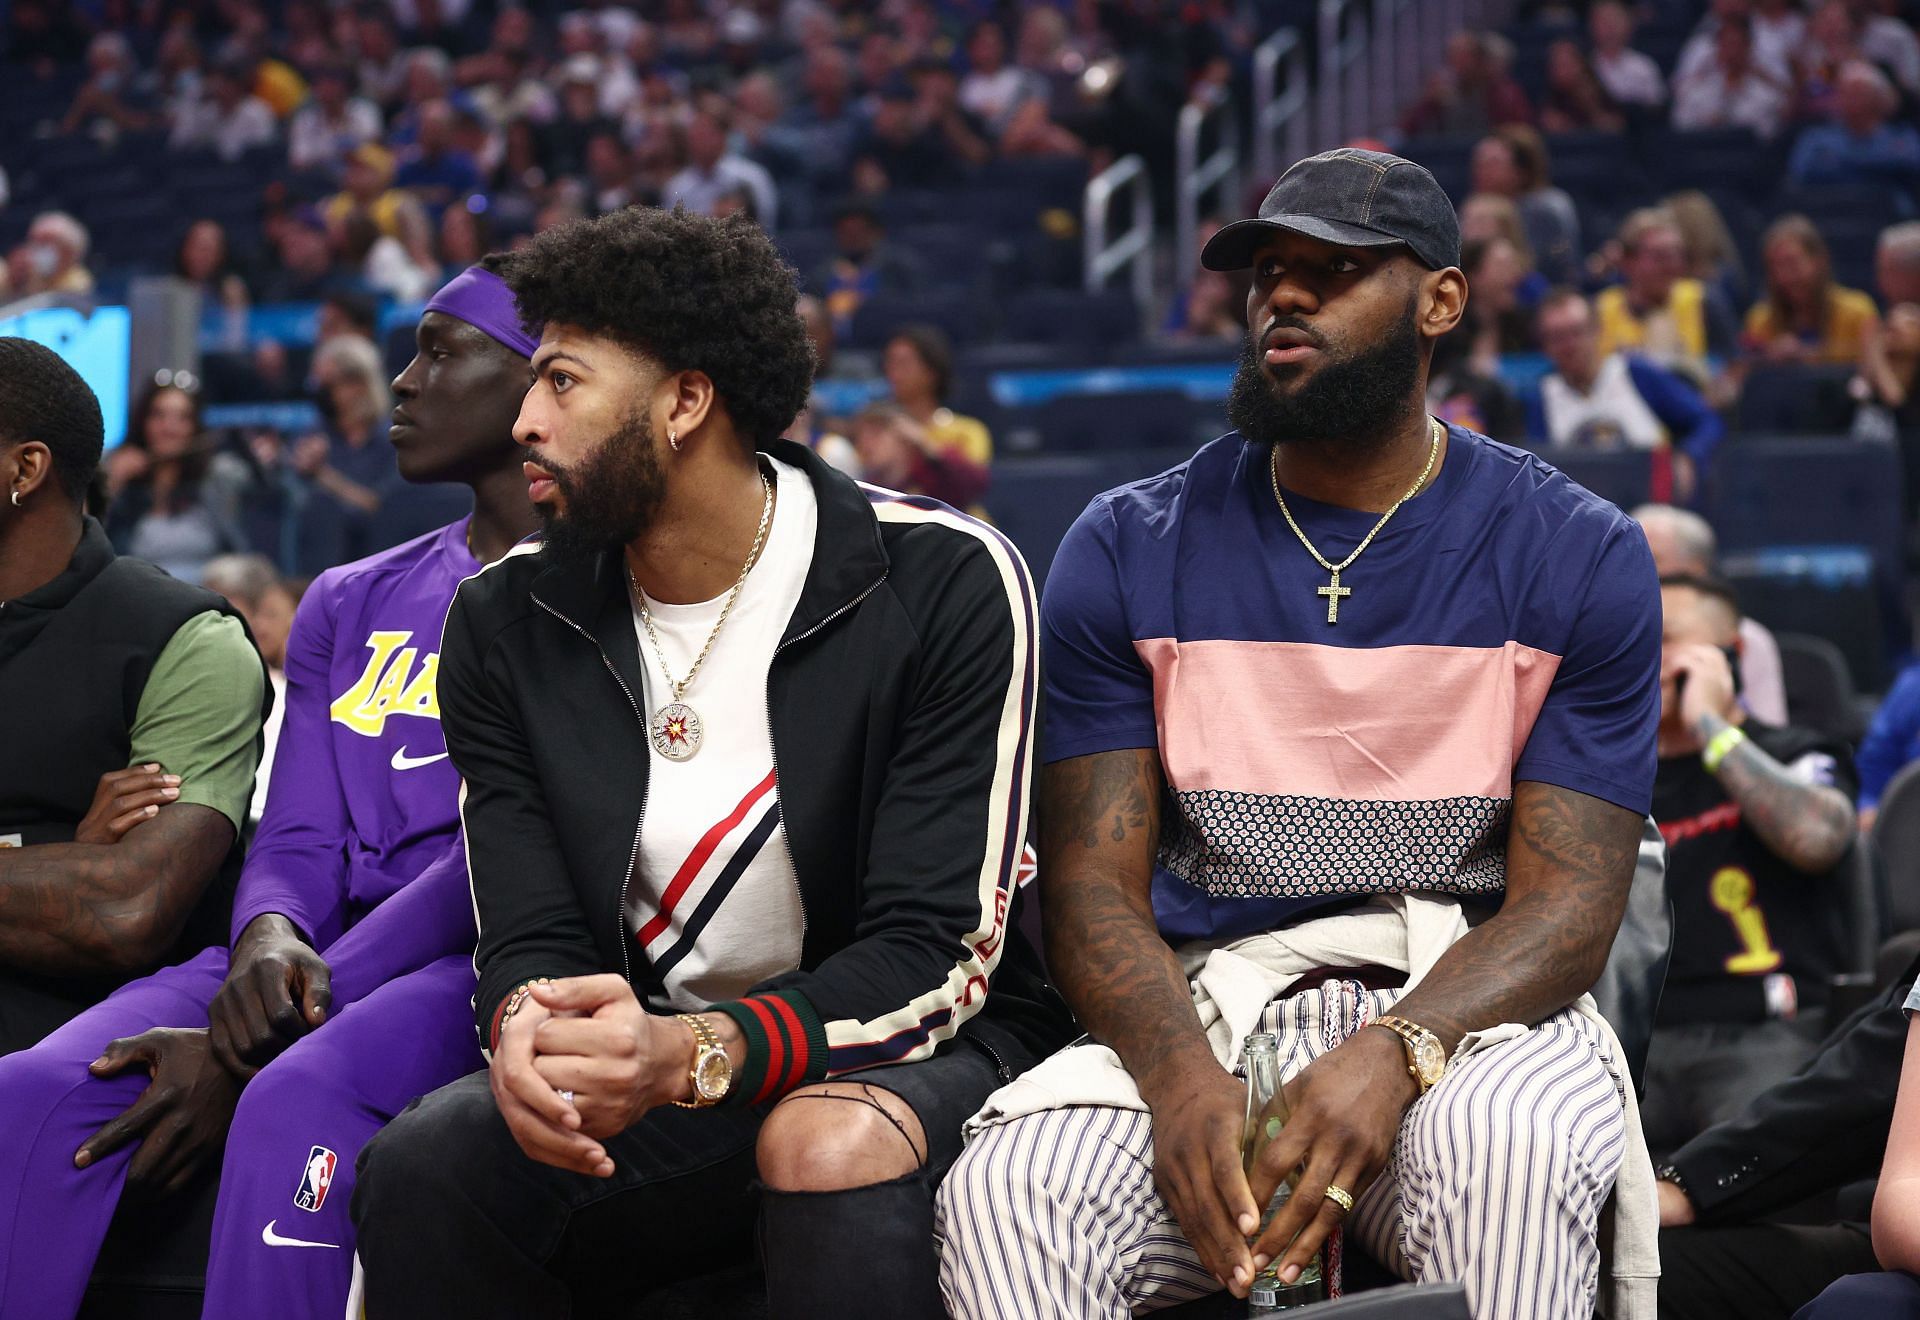 Anthony Davis (left) and LeBron James (right) of the LA Lakers sits on the bench.